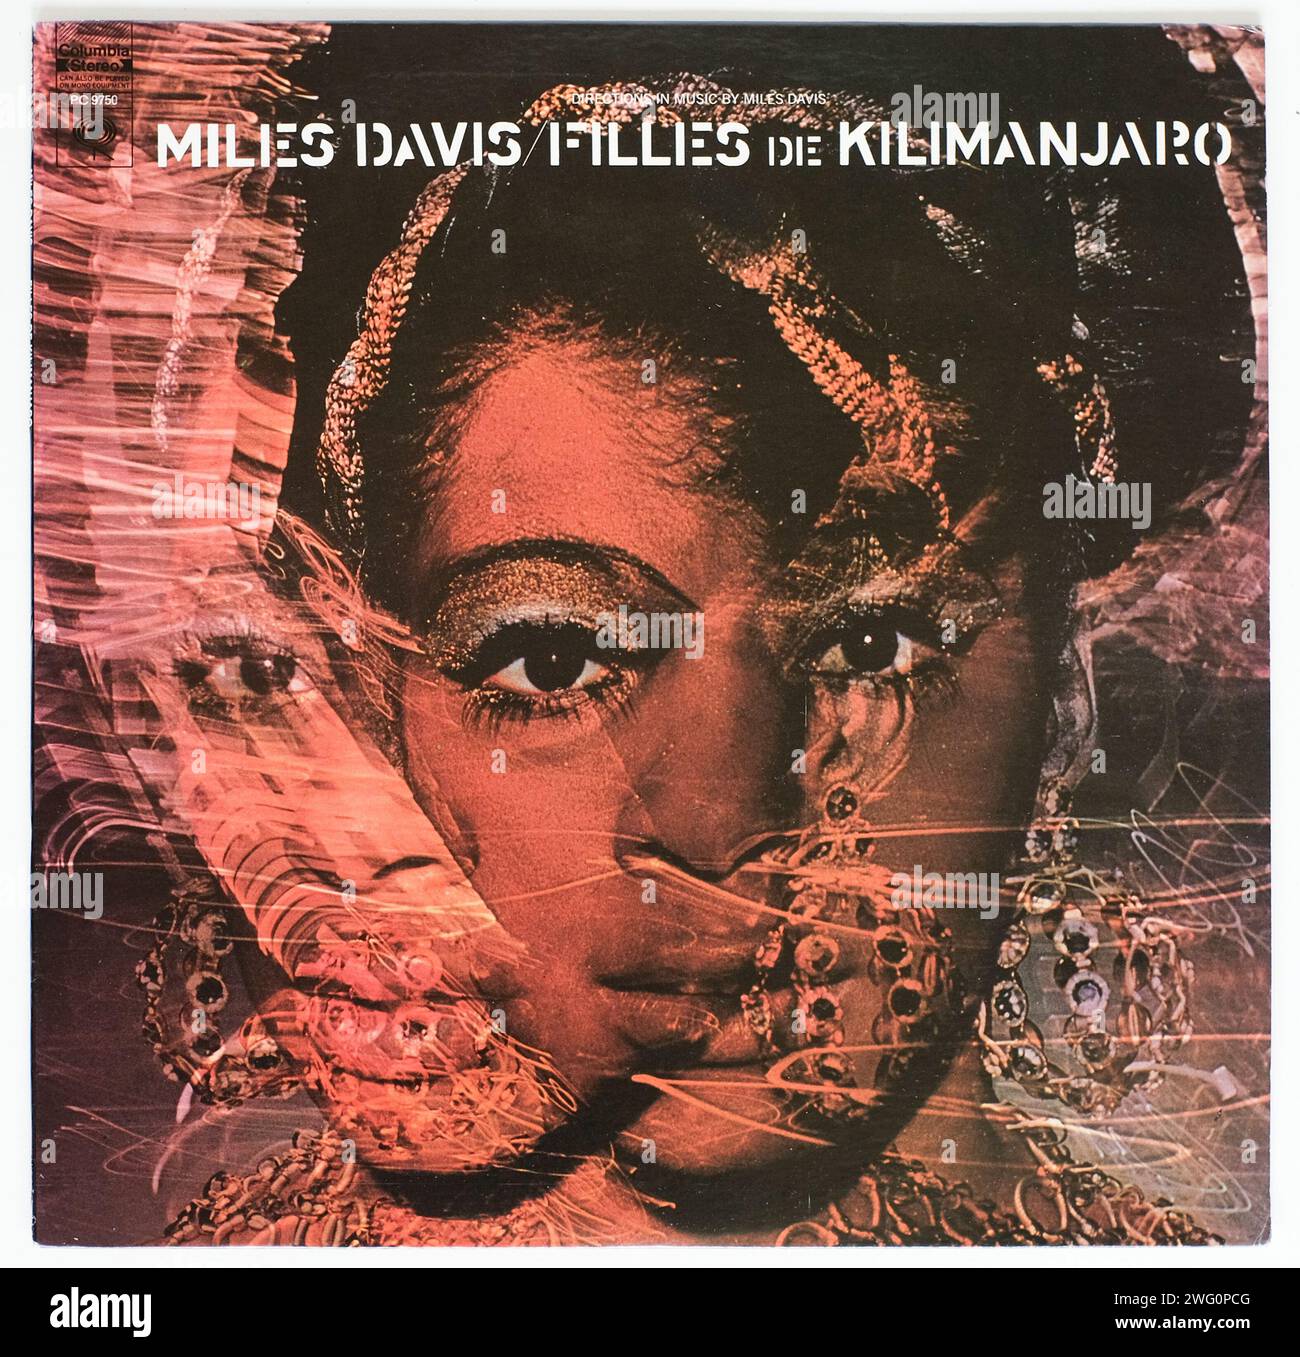 The cover of Filles de Kilimanjaro, 1968 album by Miles Davis on Colombia - EDITORIAL USE ONLY Stock Photo